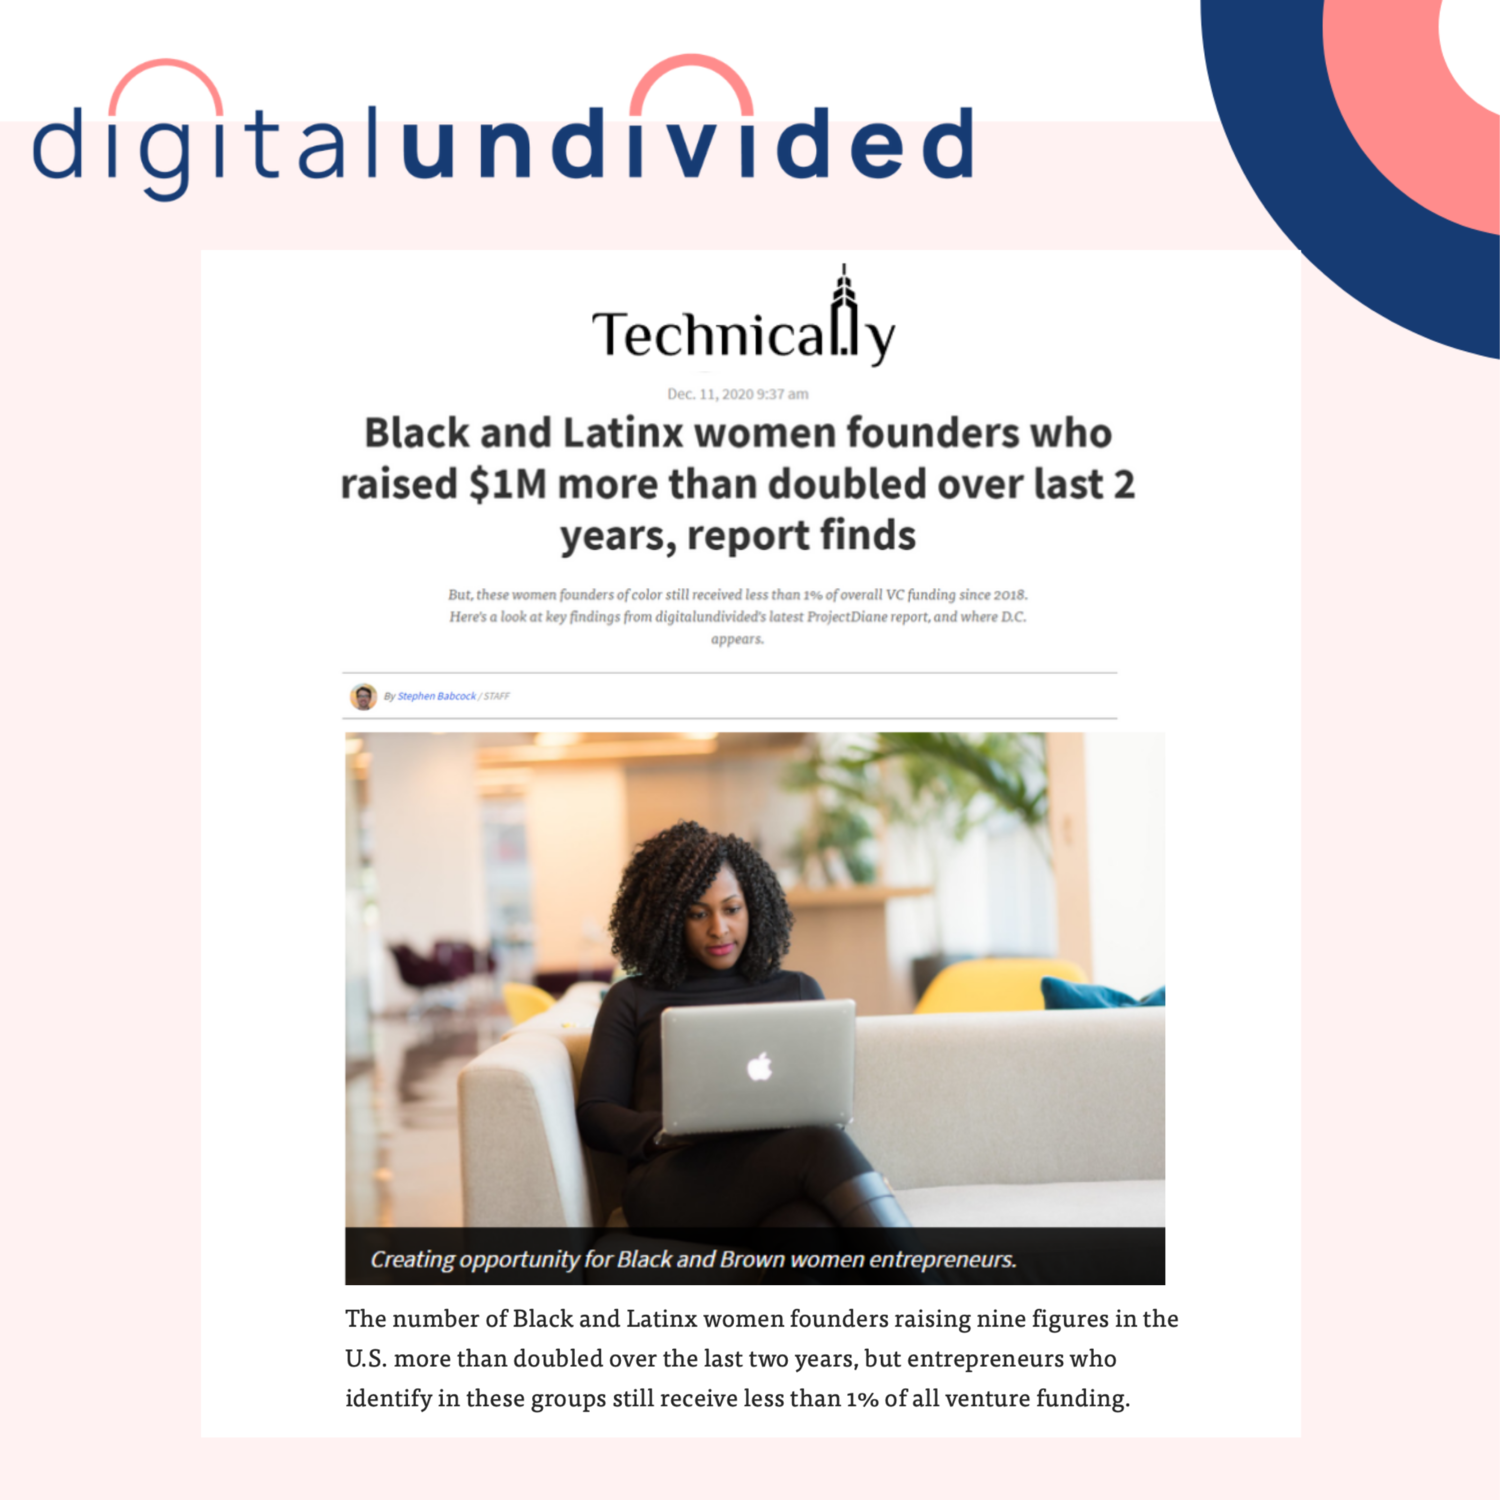 Black and Latinx women founders who raised $1M more than doubled over last 2 years, report finds